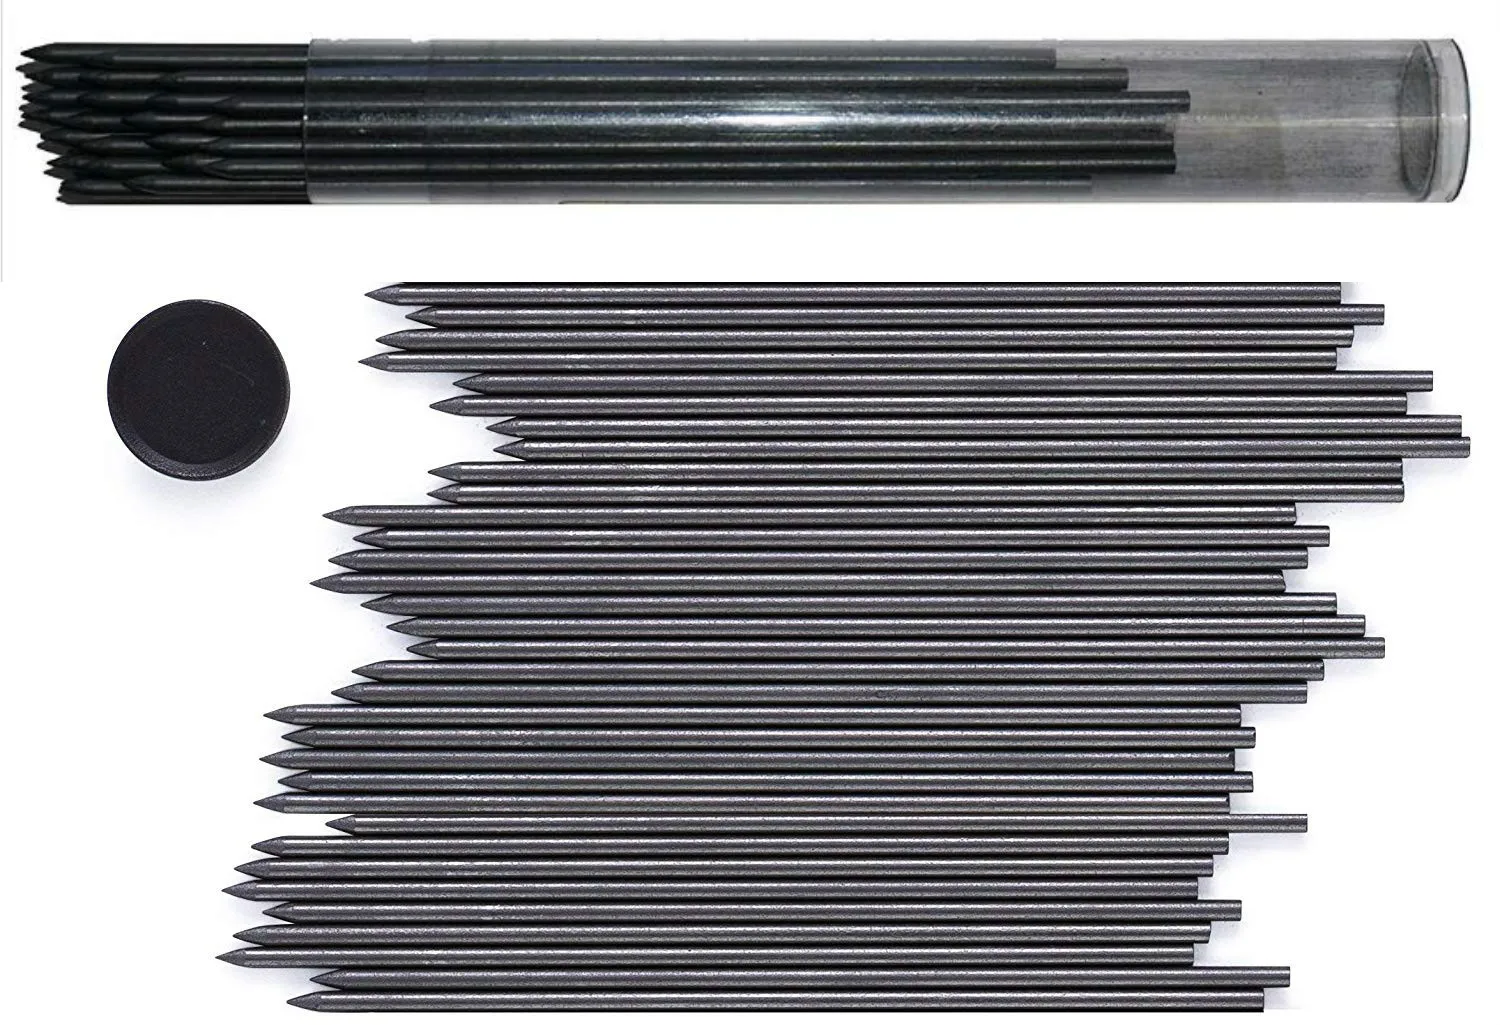 36 Pieces, 2.0 Mm HB #2 Lead Refills, Extra Bold Thickness, Break Resistant Lead/Graphite Lot